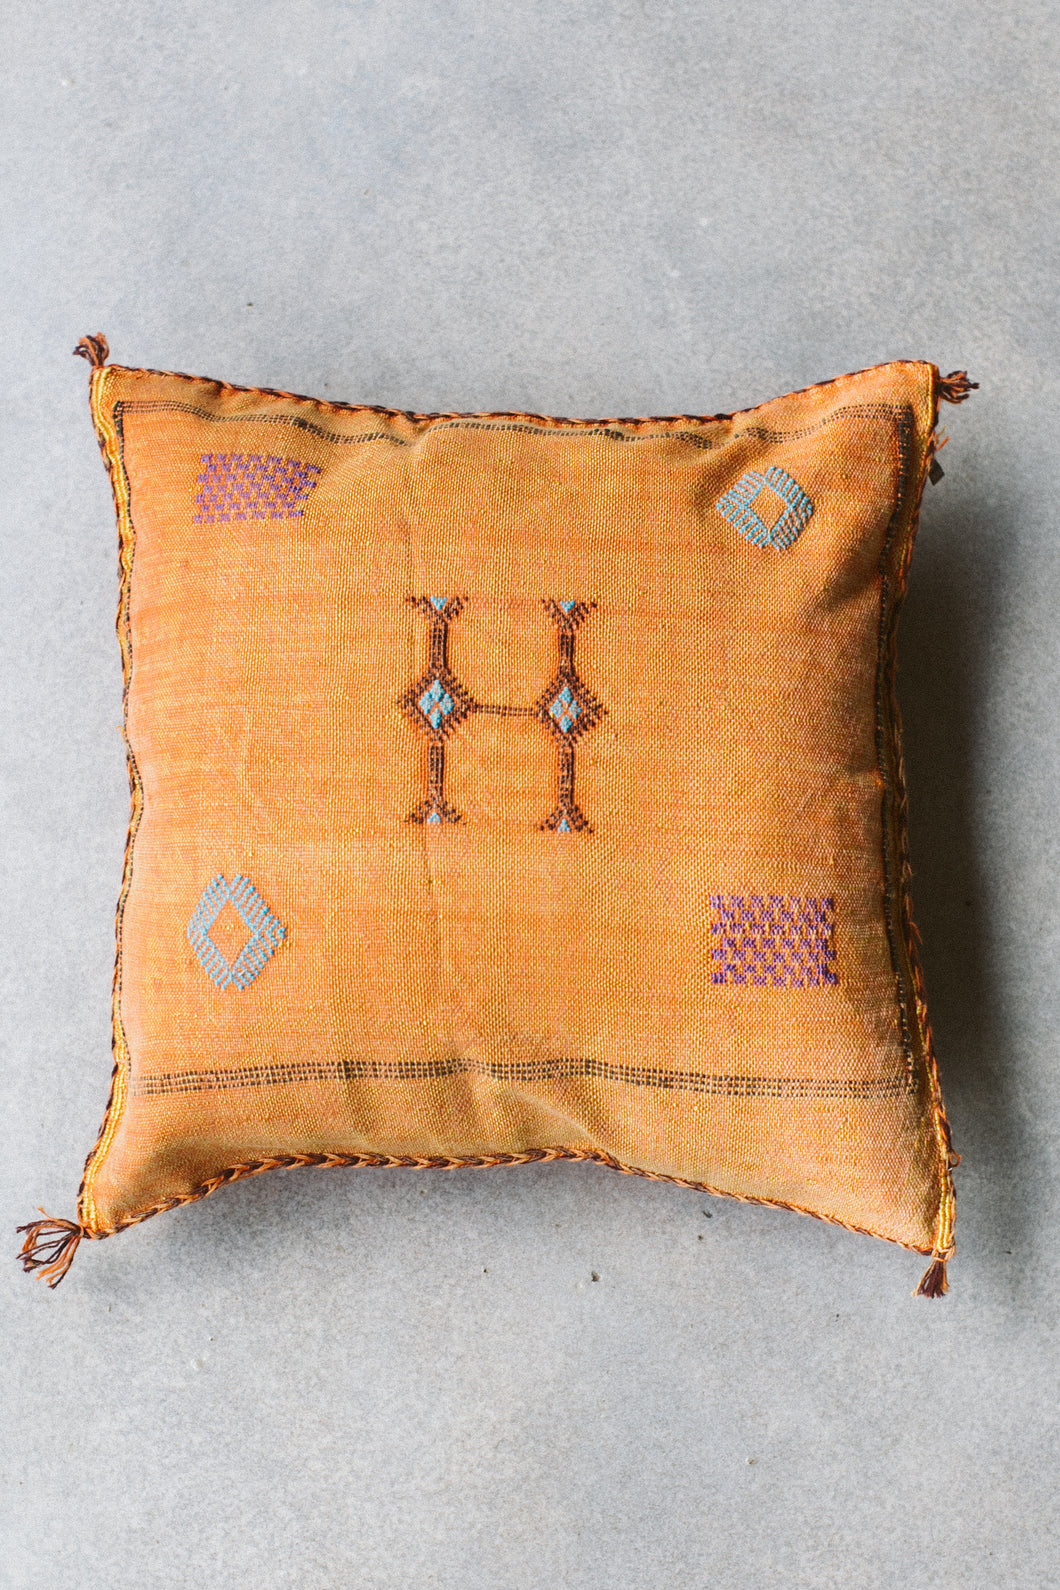 Cactus Silk Pillow - Orange with Colorful Embroidery